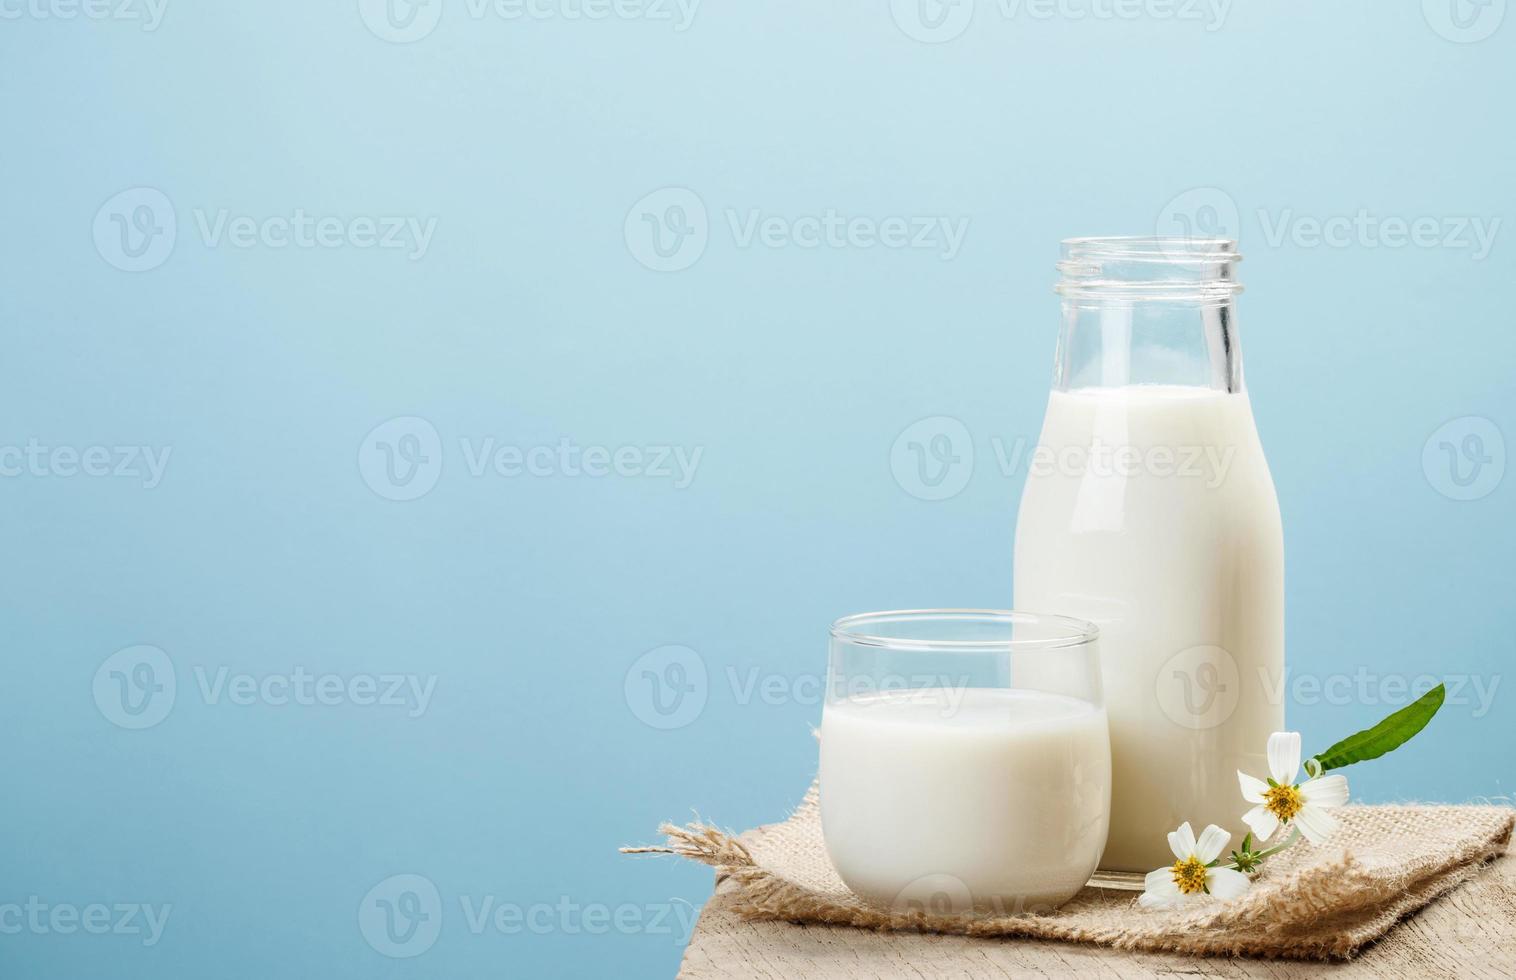 A bottle of milk and glass of milk on a wooden table on a blue background, tasty, nutritious and healthy dairy products photo